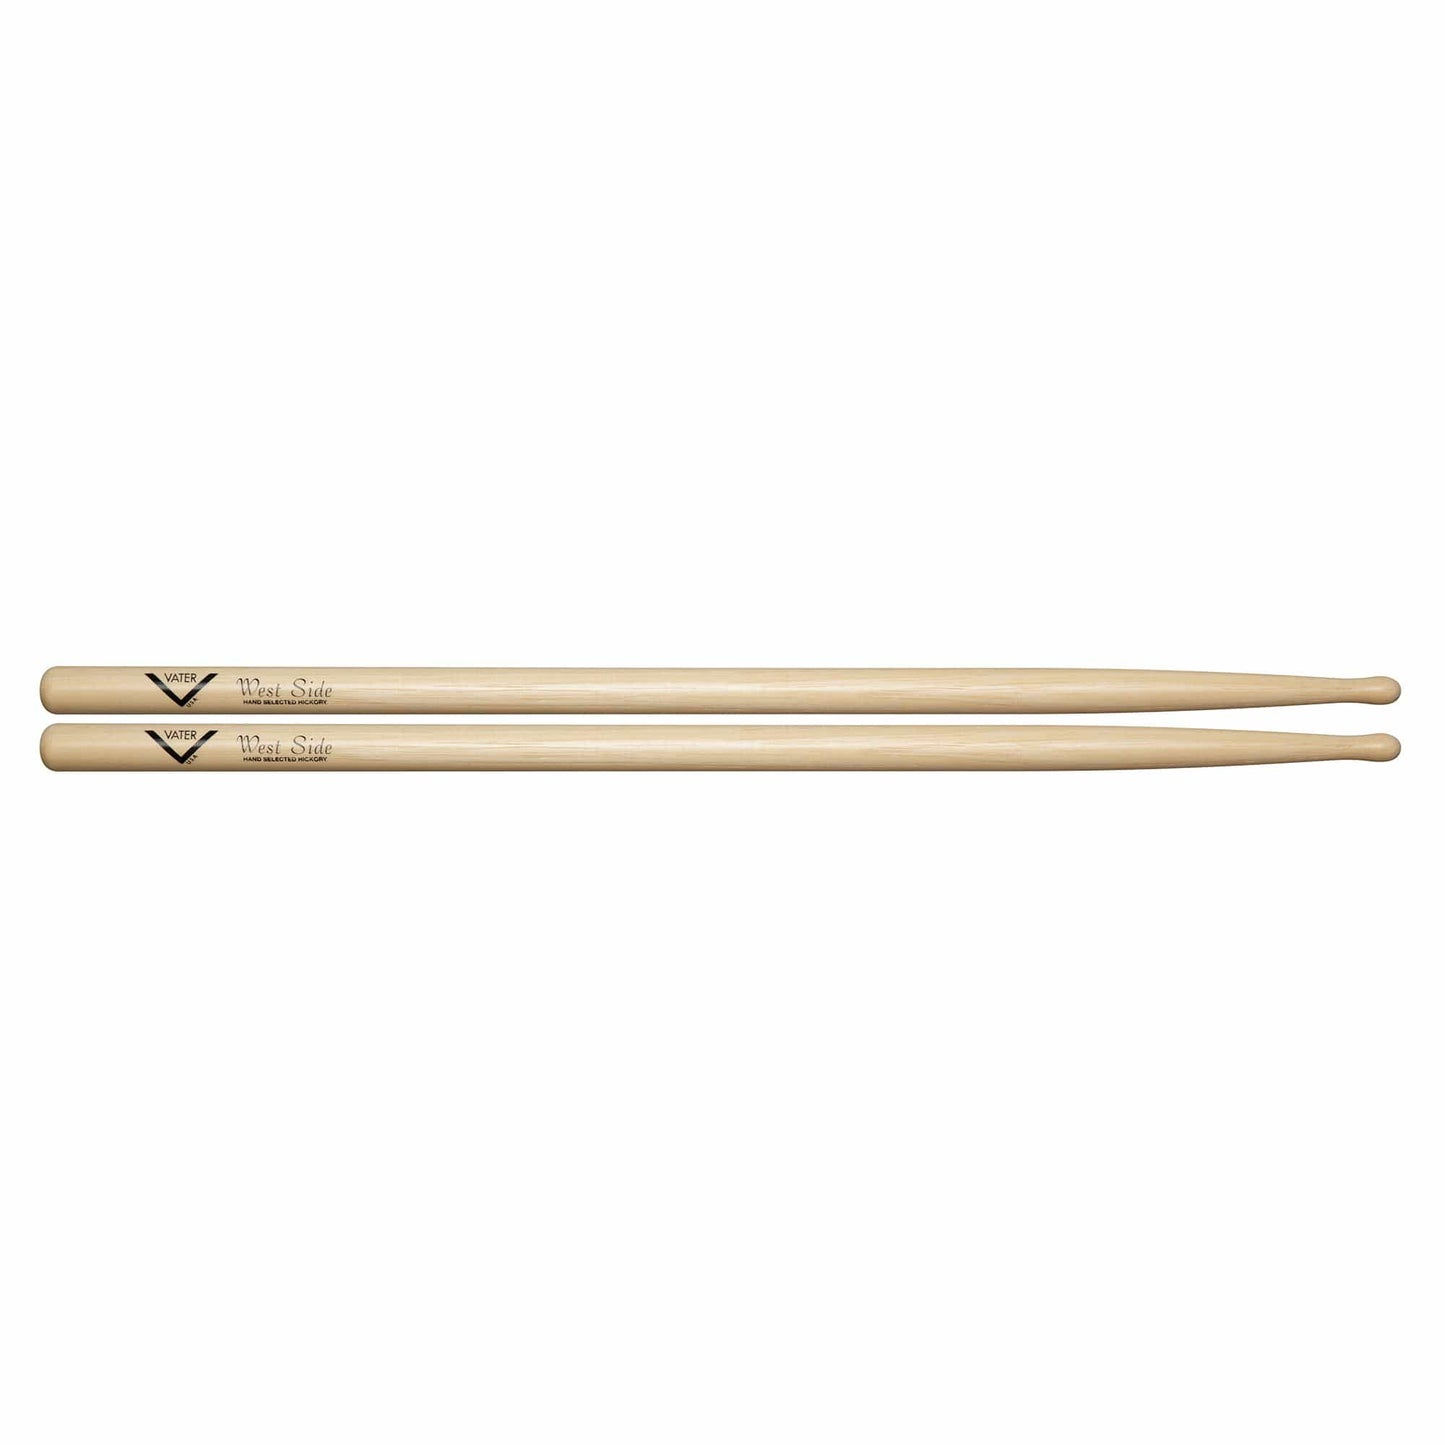 Vater Hickory West Side Wood Tip Drum Sticks Drums and Percussion